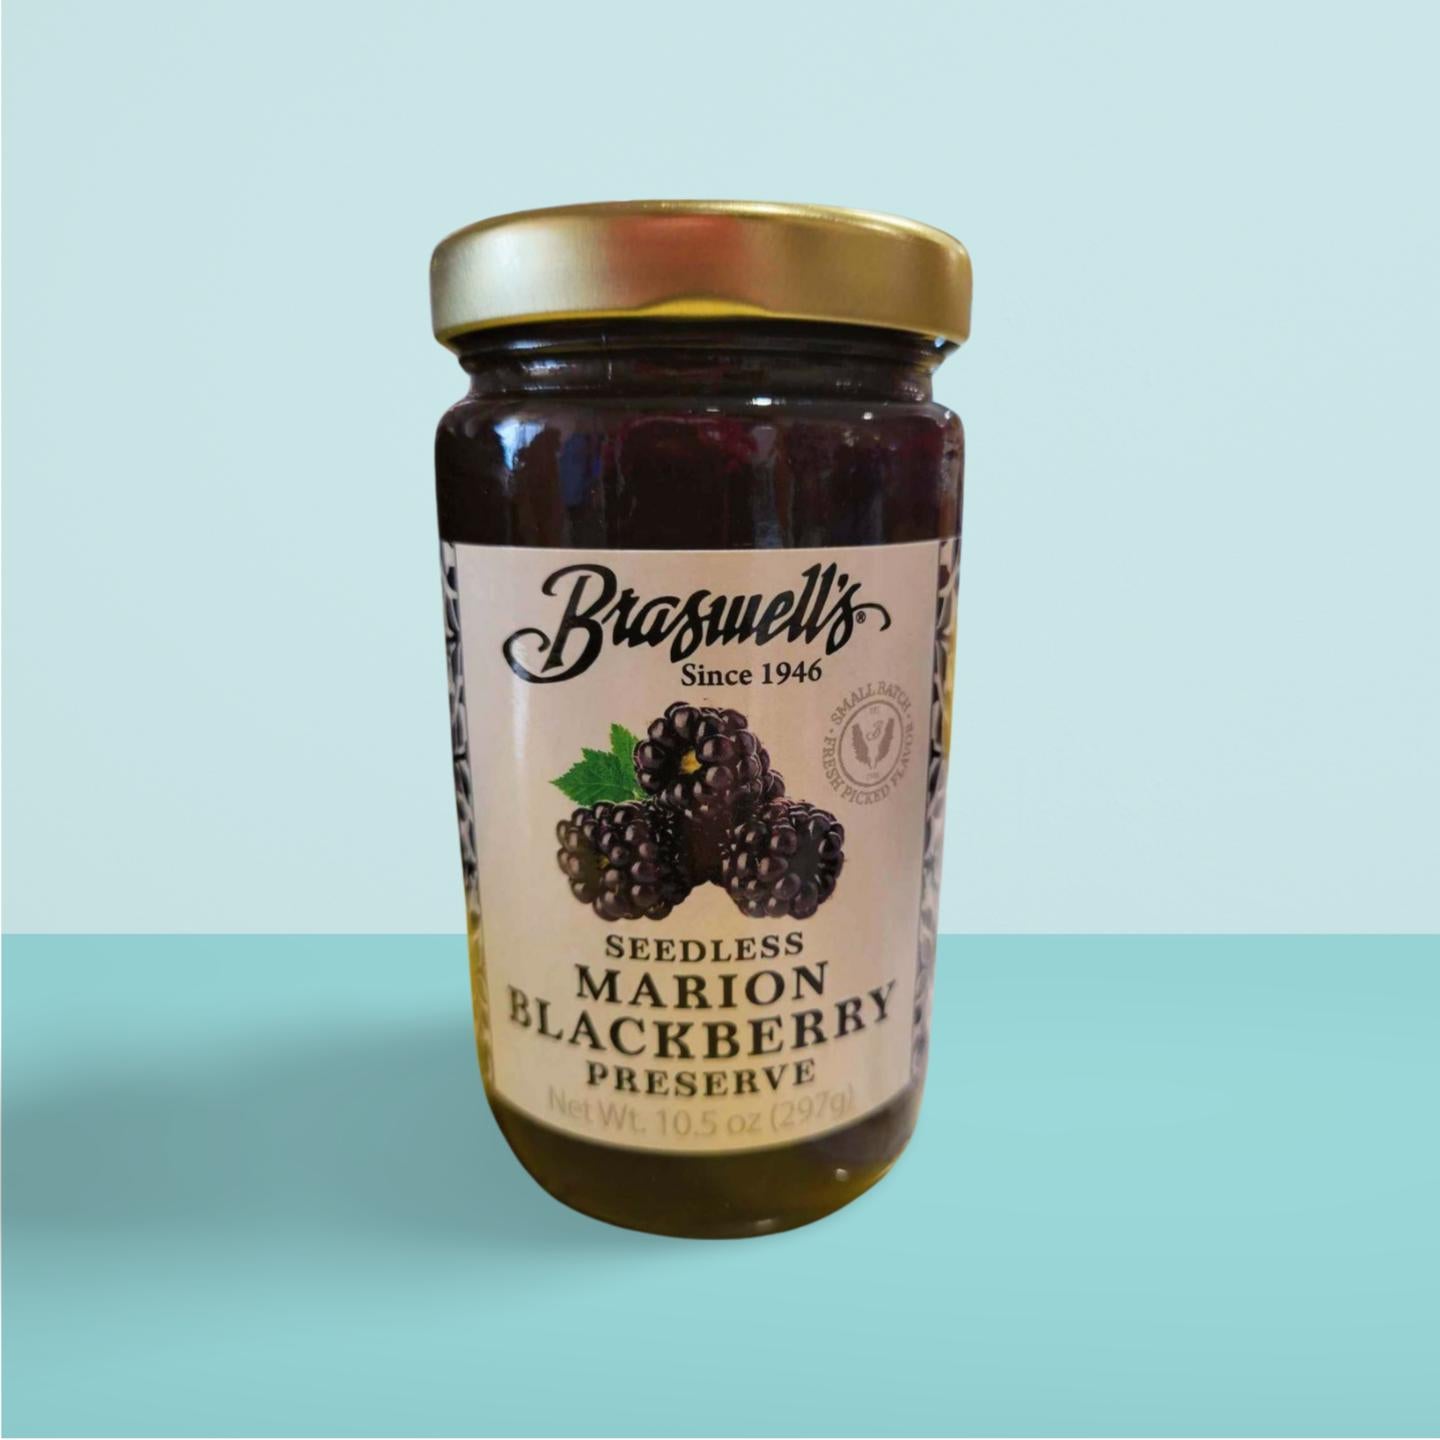 Braswell's Seedless Marion Blackberry Preserve - Dusty's Country Store